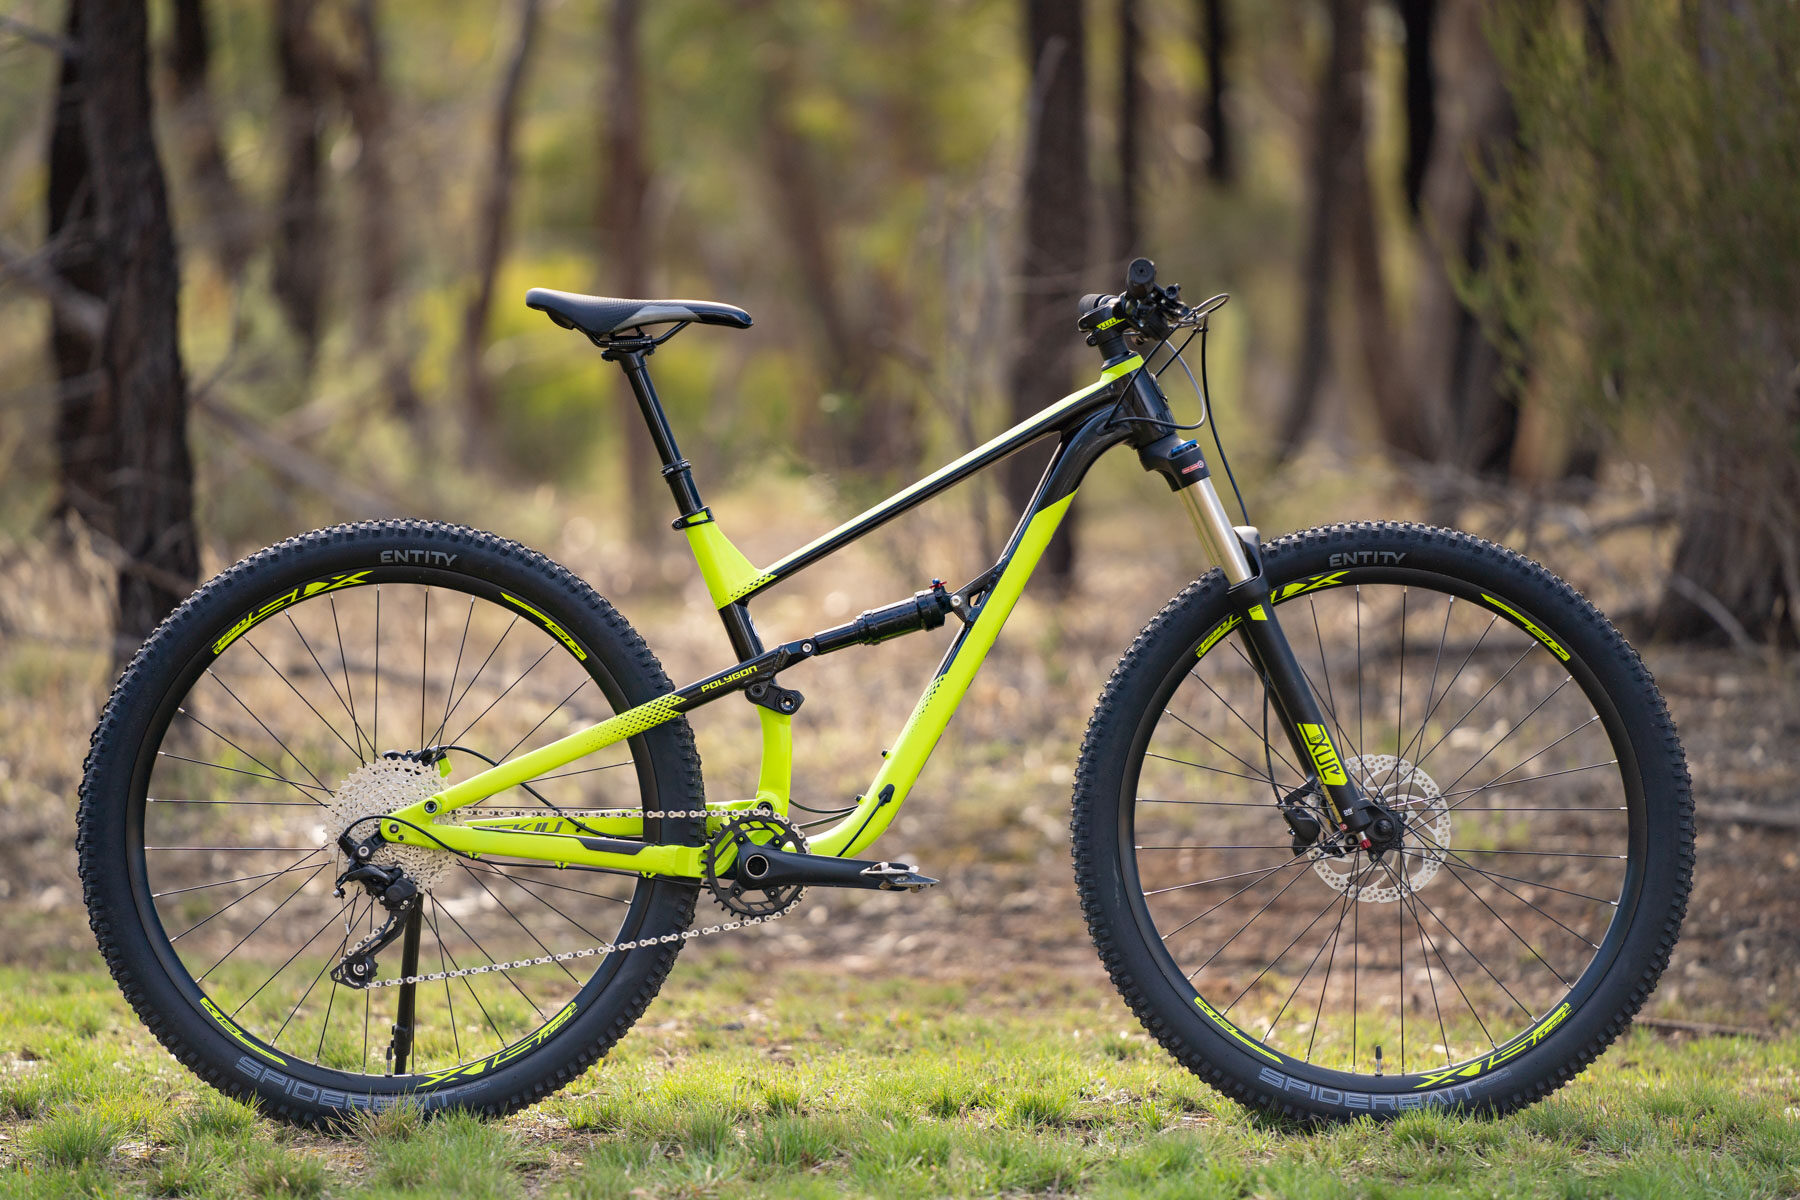 On Test The New 2020 Polygon Siskiu D6 Is A Full Suspension Trail